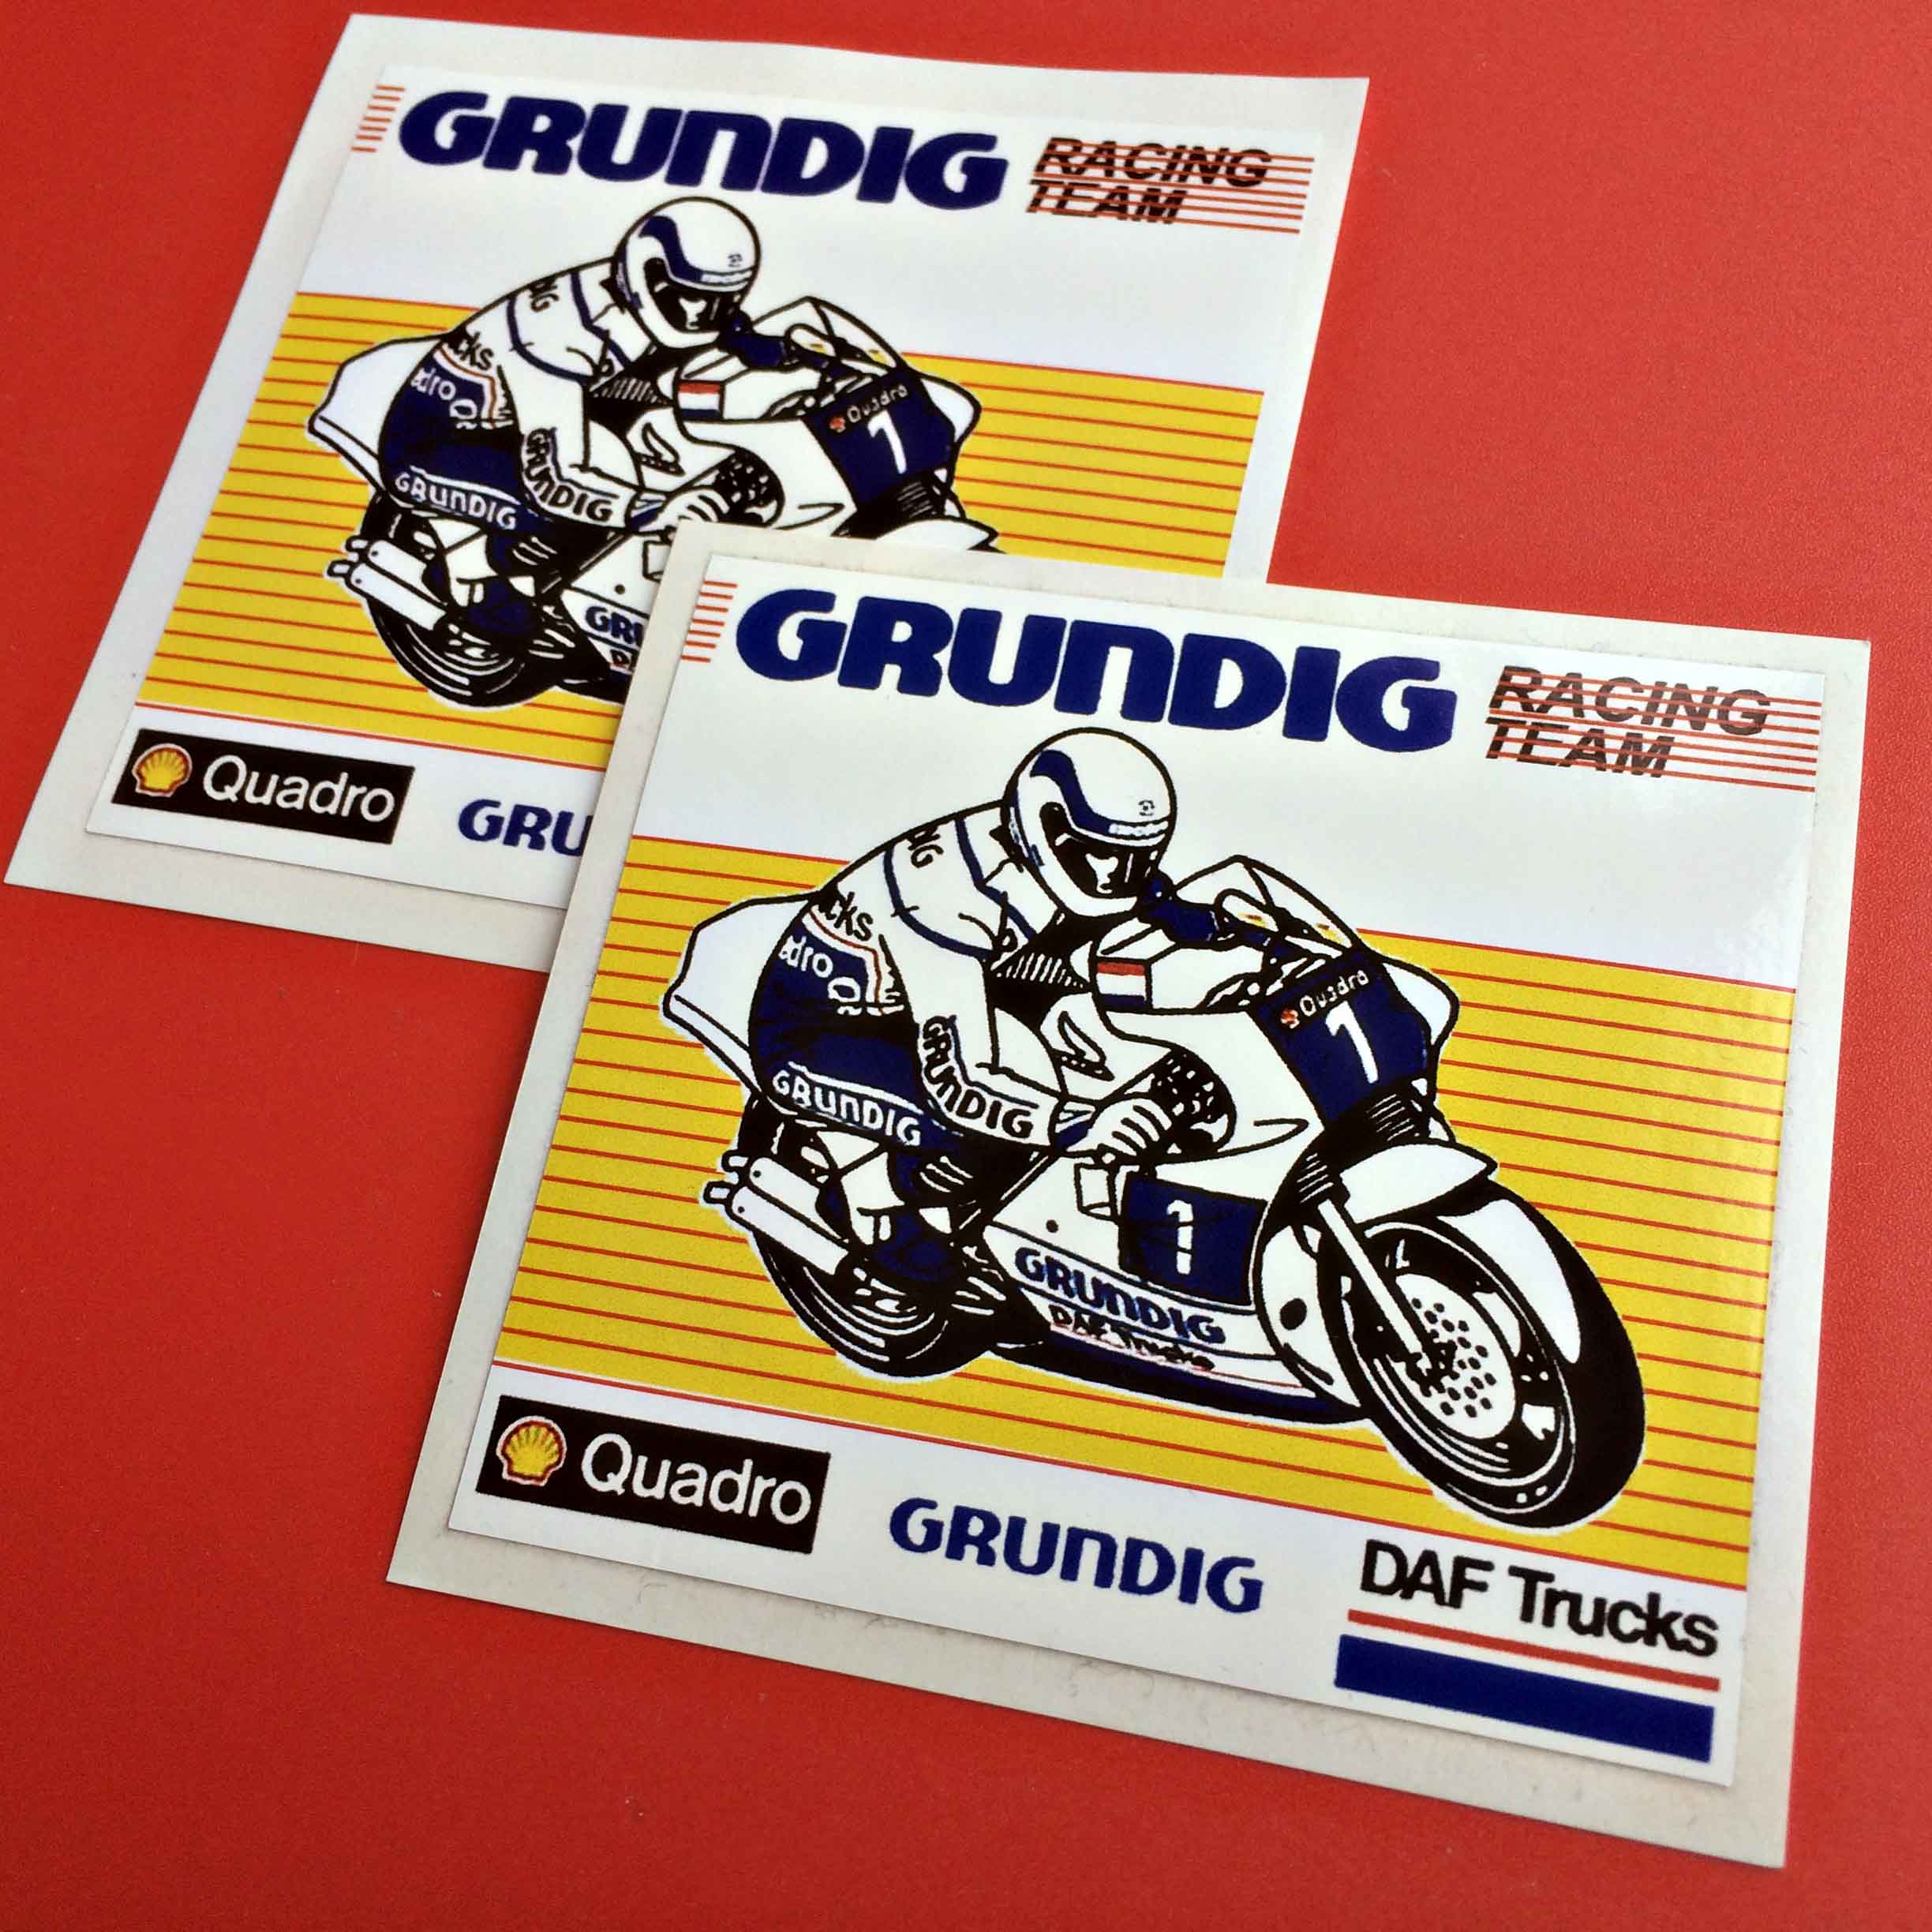 A motorcyclist riding a motorbike with the number 1 on the front. They are both in blue and white and emblazoned with advertising. On a yellow background Grundig Racing Team, Quadro and DAF Trucks logos surround them.